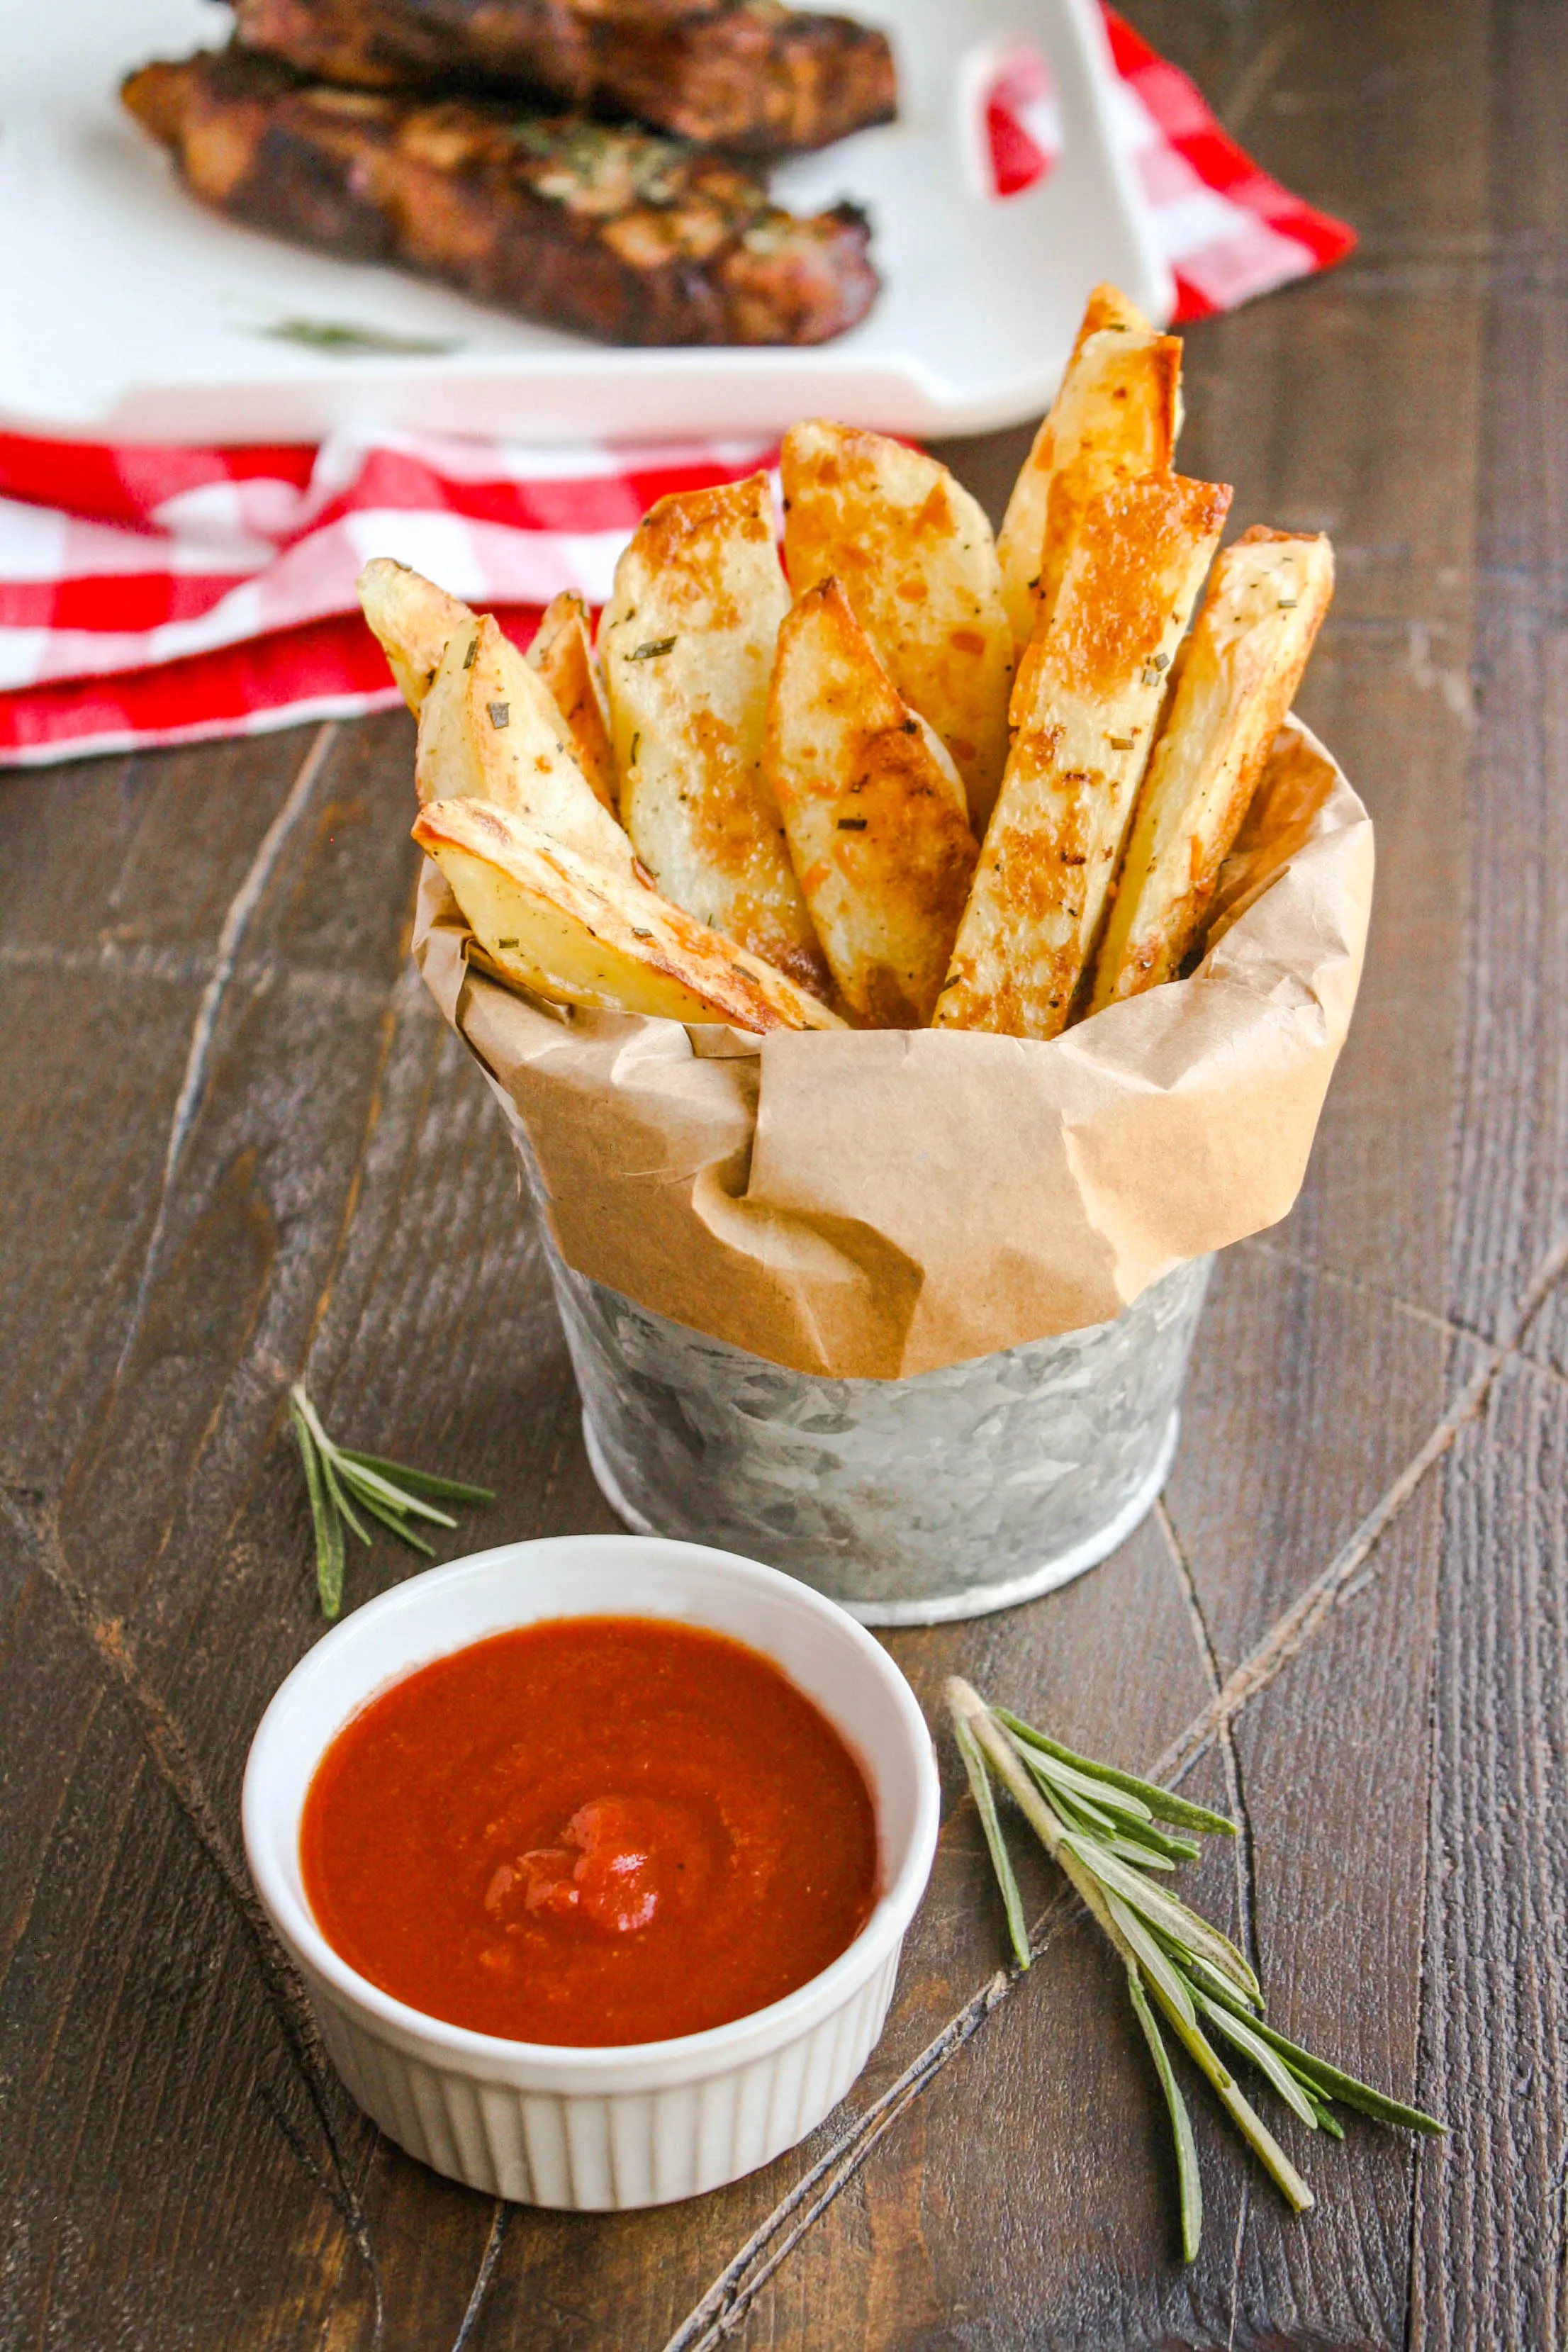 Oven Baked Rosemary Steak Fries Homemade Ketchup make a great side dish. You'll love their crispiness.